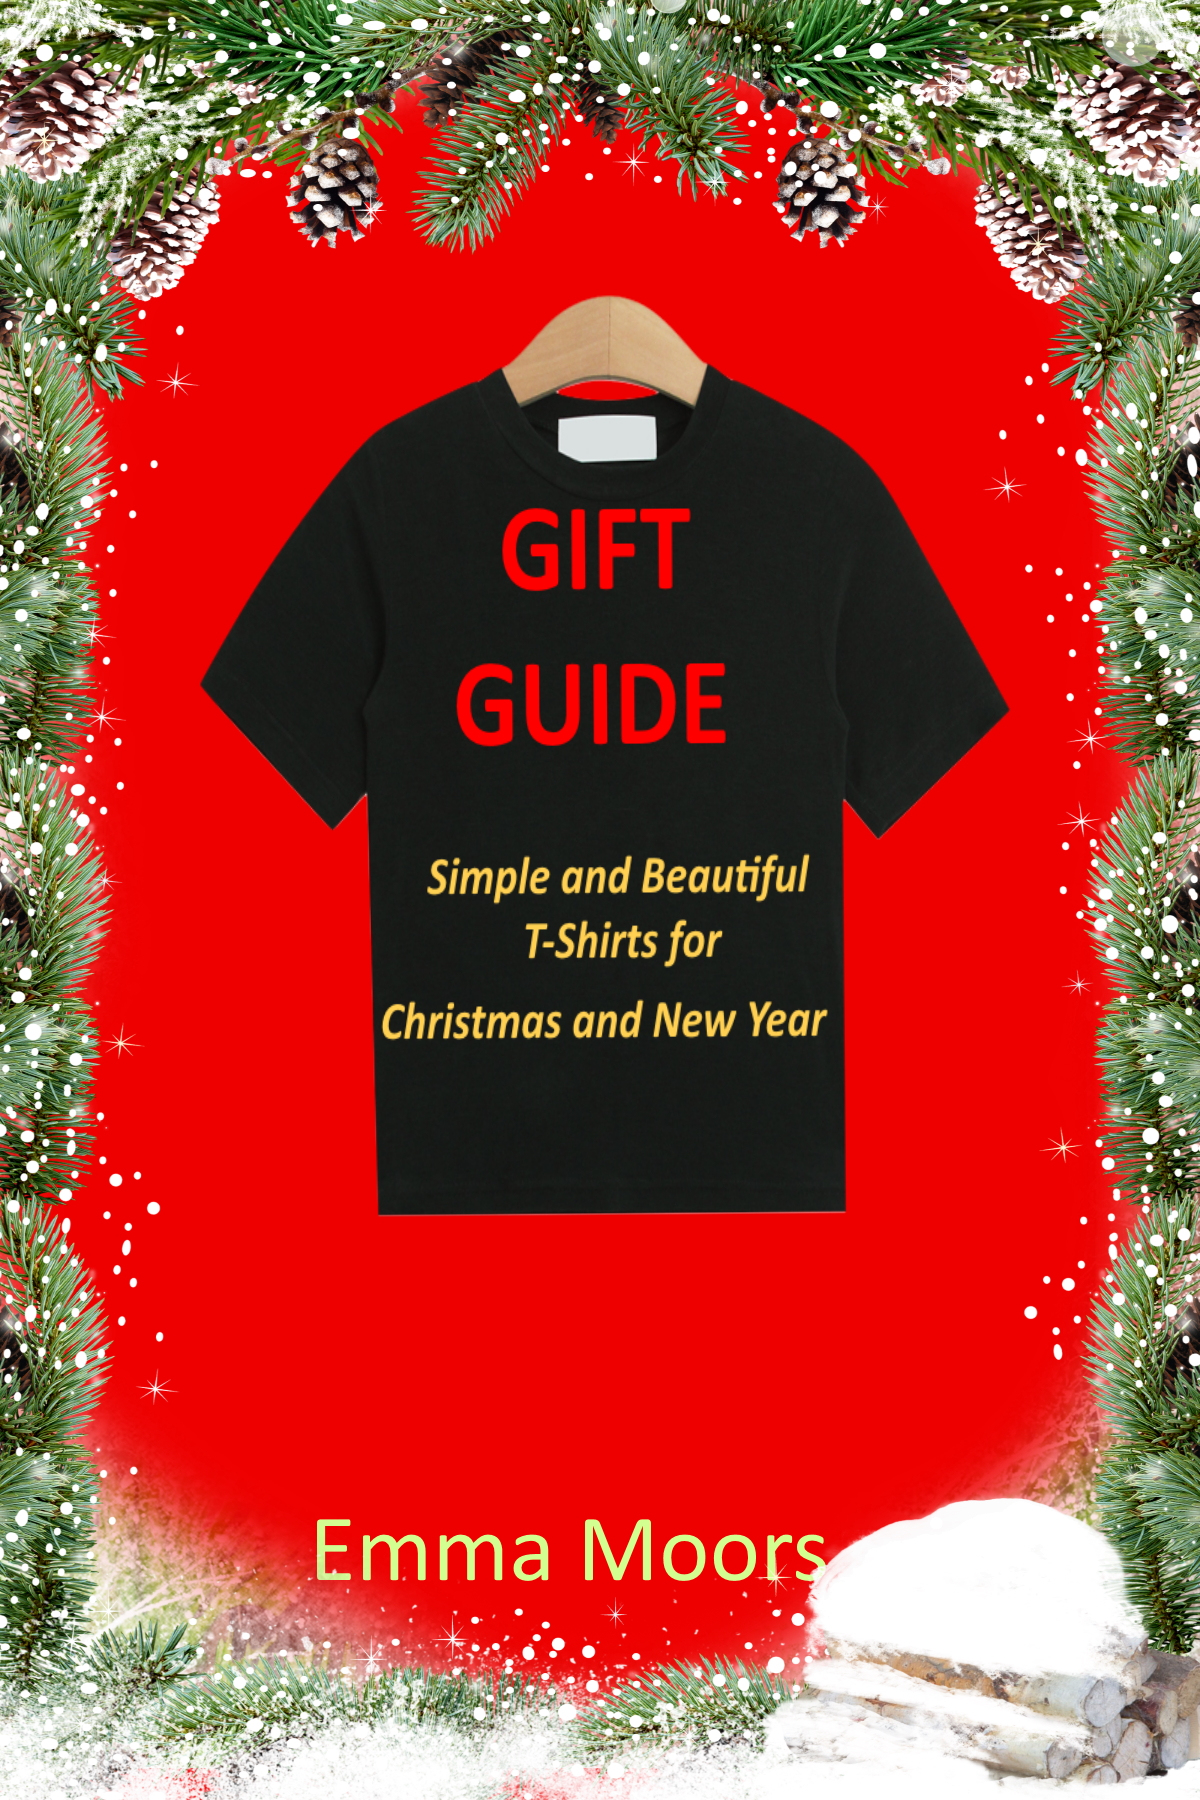 FREE: Gift Guide Simple and Beautiful T-shirts for Christmas and New Year by Emma Moors